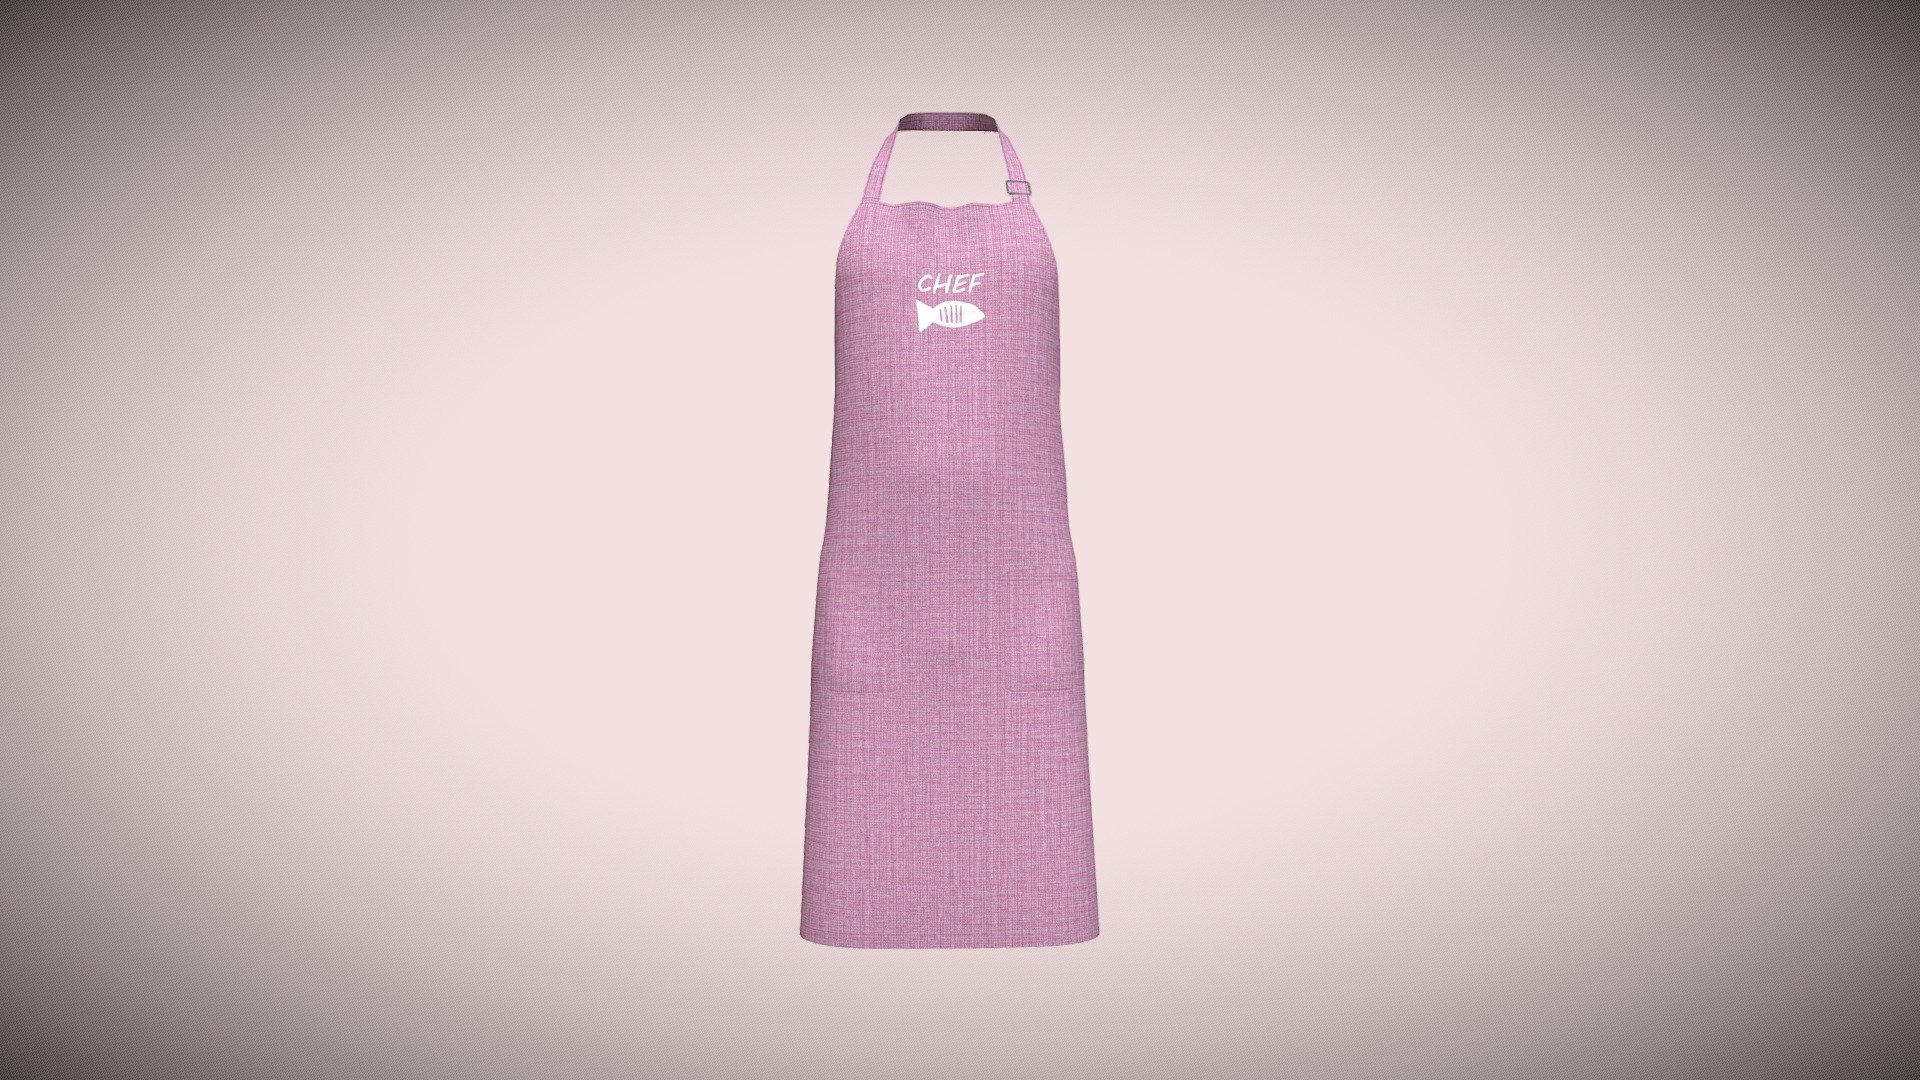 Apron Chef-V4

I am a Professional 3D Fashion/Apprel Designer. I have 7 years working experience about 3D Fashion. I am working with Clo3d, Marvelous Designer (MD), Daz3d, Blender, Cinema4d, Etc.

Features:
1.  2k UV Texture
2.  Triangle mesh
3.  Textures with Non-overlapping UV Map (2048x2048 Pixels)
4.  In additonal Textures folder have diffuse,displacement,metalness,normal,opacity,roughness maps.

Attachment Fils:
Exported Files (All are exported in DAZ Studio scale)
* OBJ
* FBX
* Marvelous Designer/Clo3d file (zprj)

Thanks 3d model